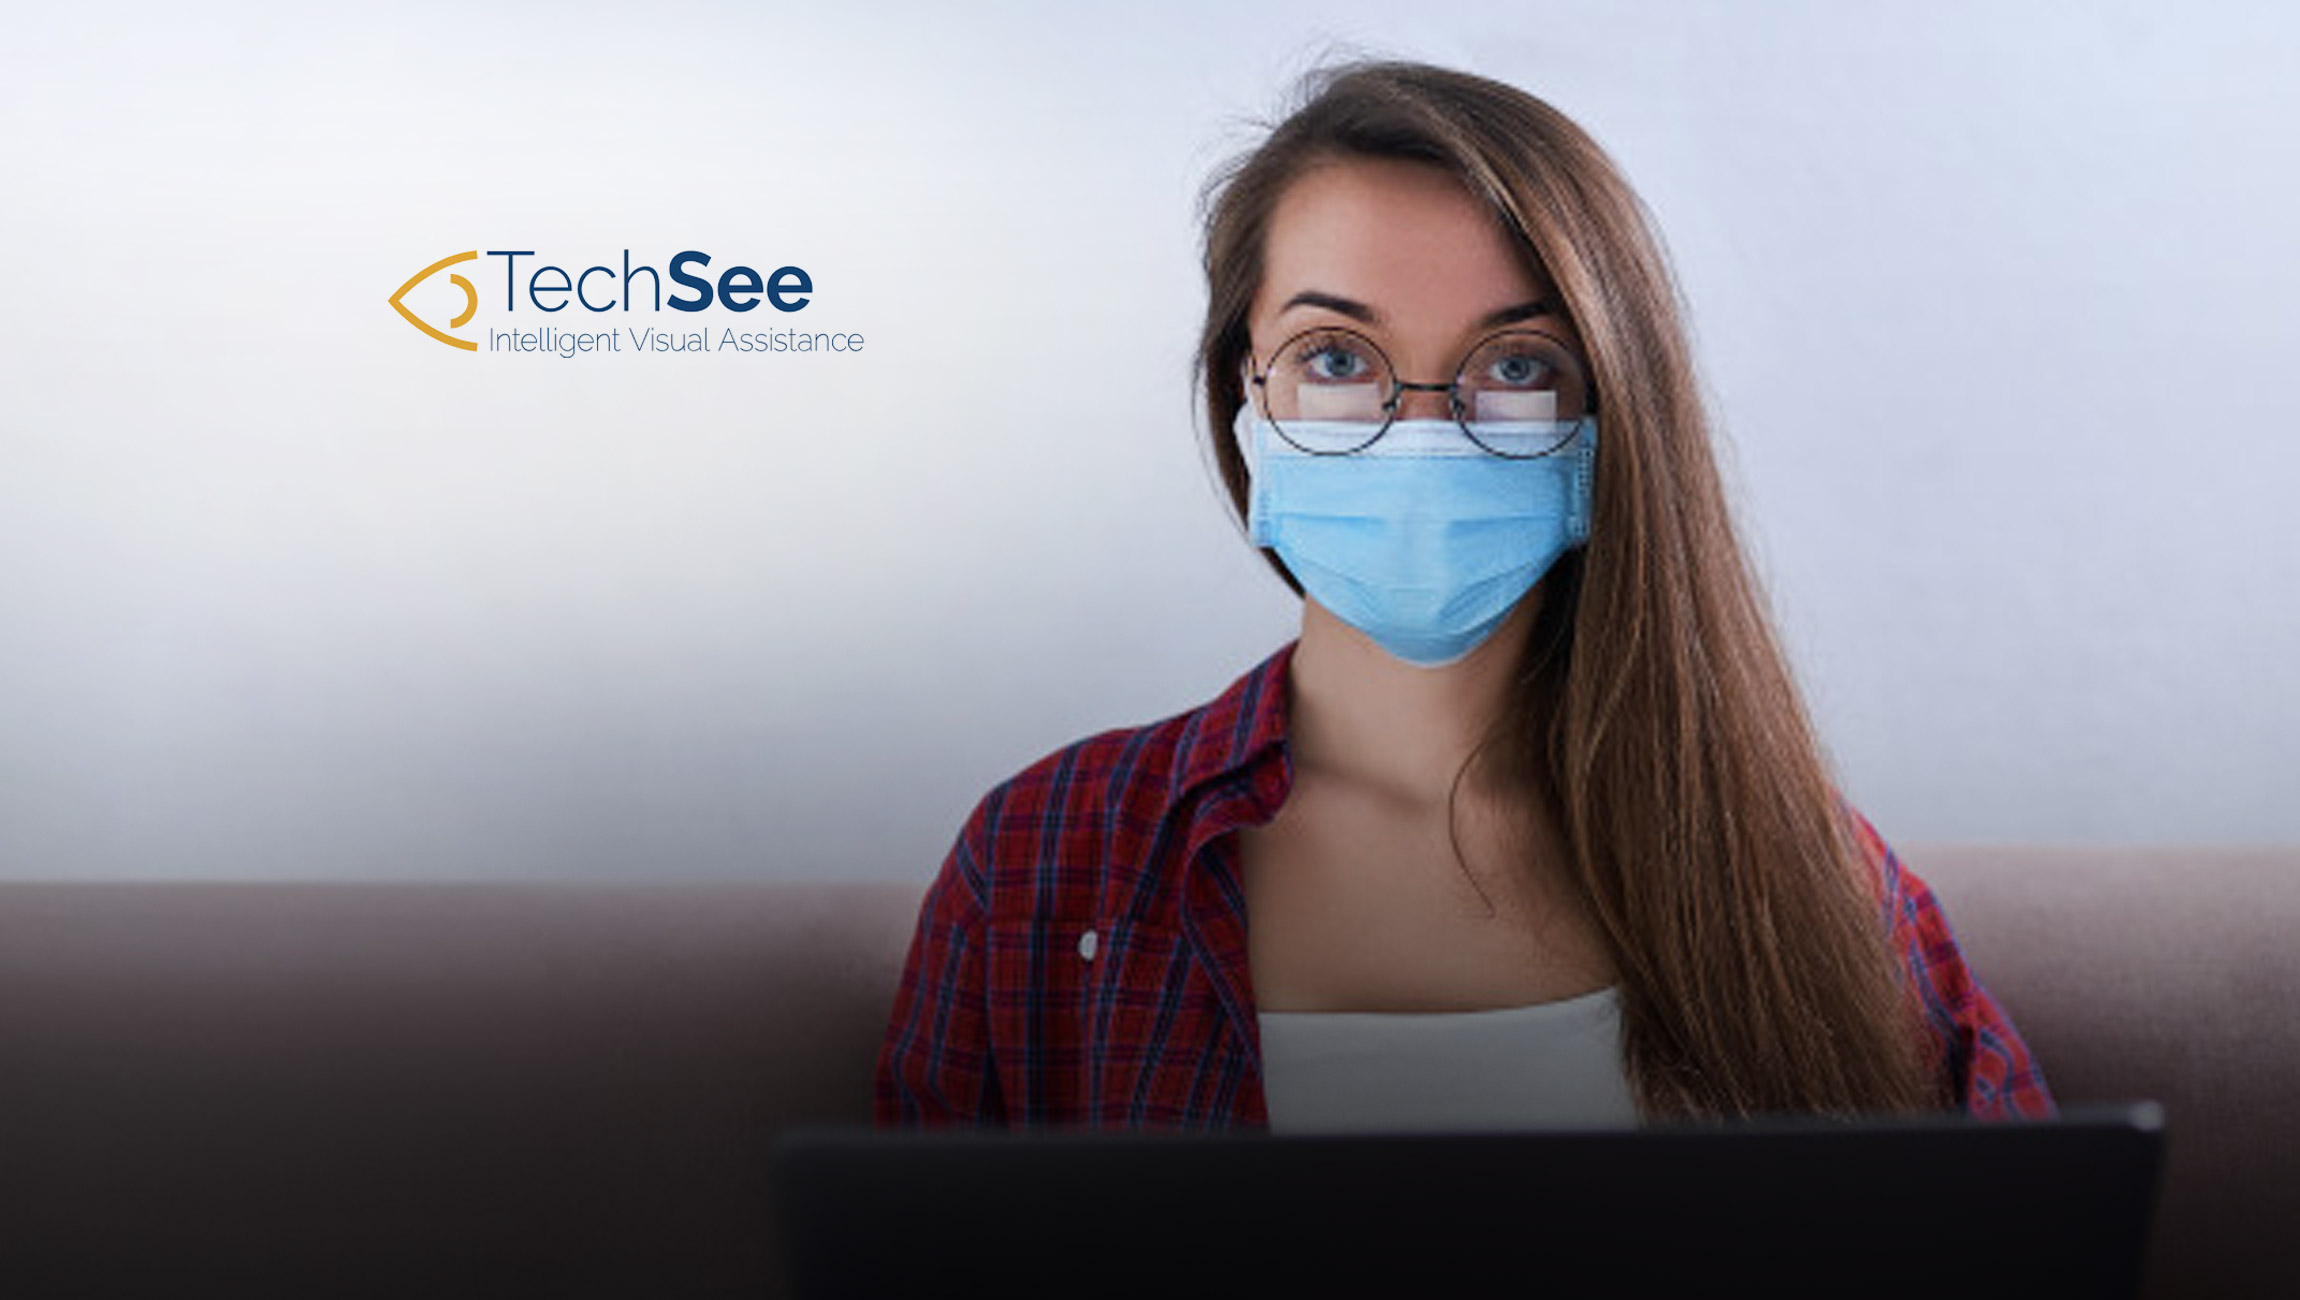 TechSee Closes $30M Series C Investment Round to Accelerate Growth